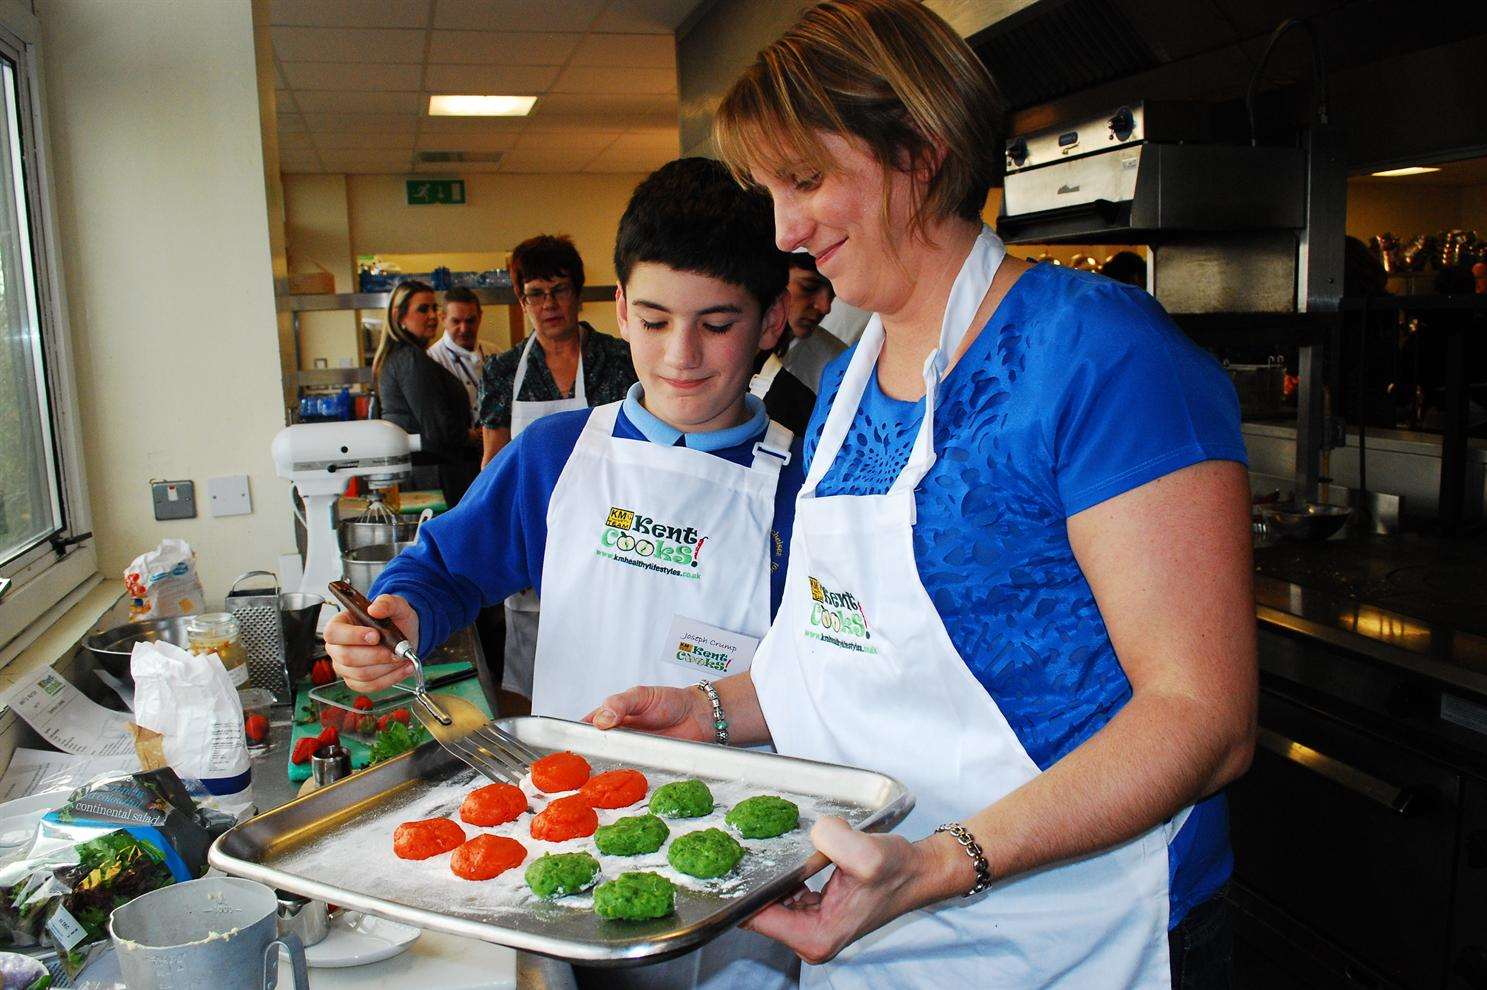 Competitors at work in the kitchen during last year's Kent Cooks competition